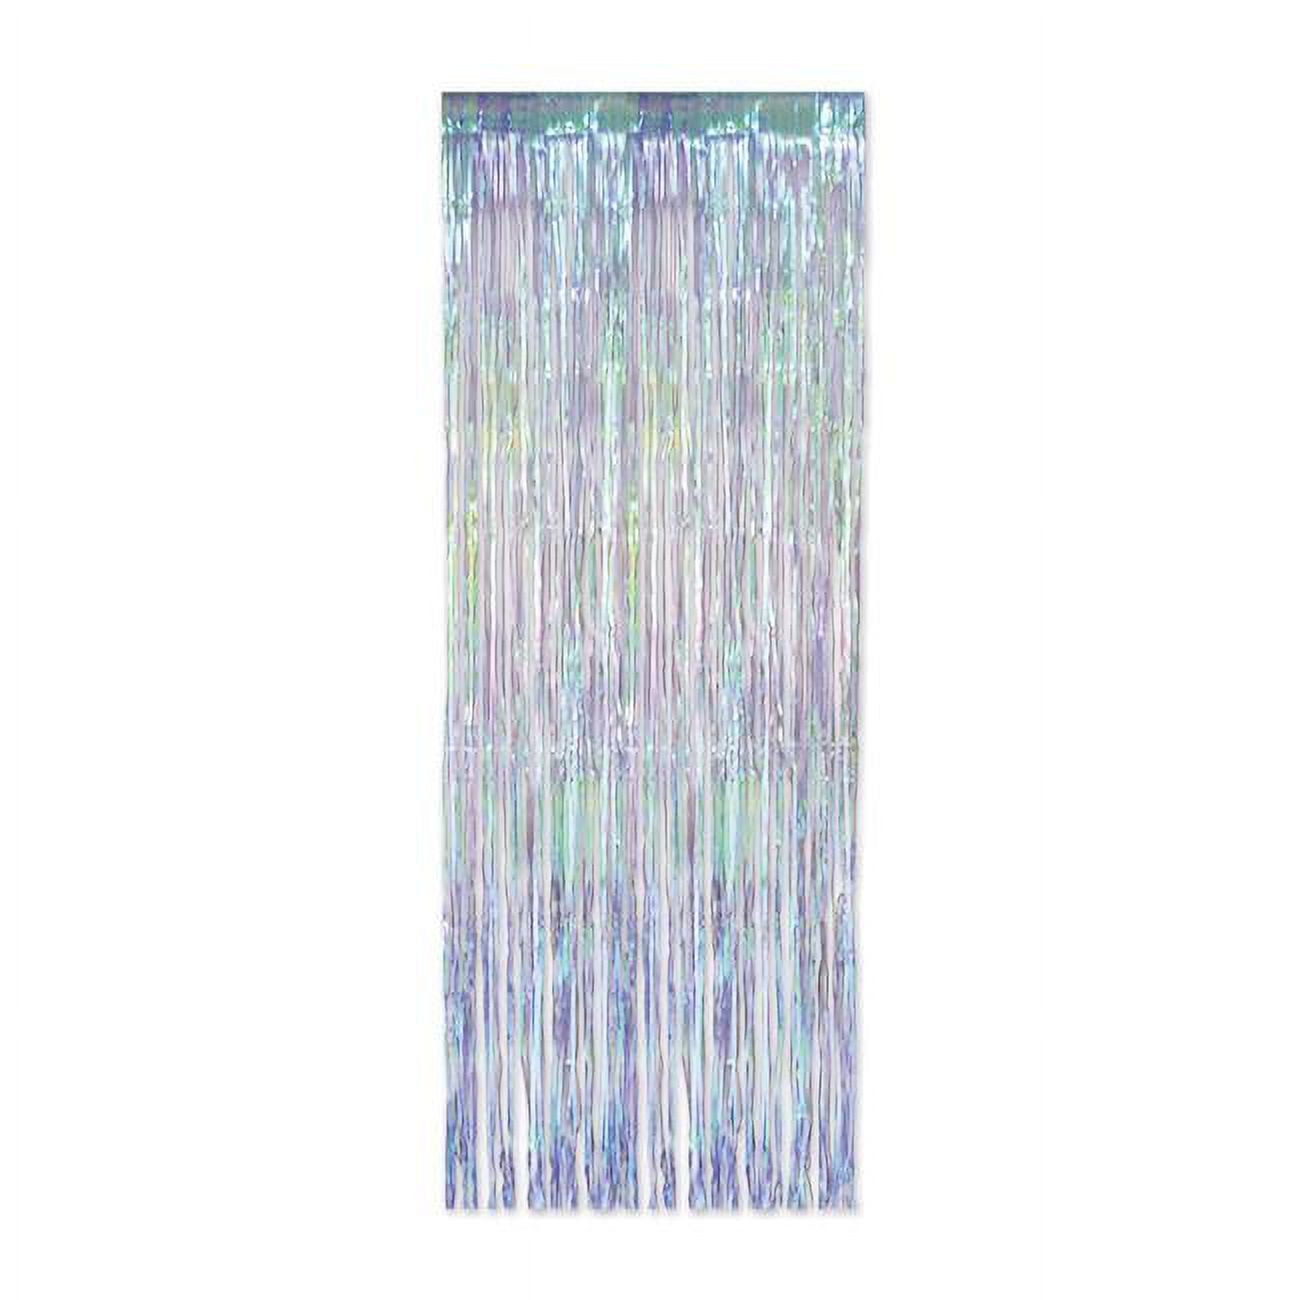 Picture of Beistle 53528 8 x 3 ft. 1-Ply Iridescent Fringe Curtain - Pack of 6